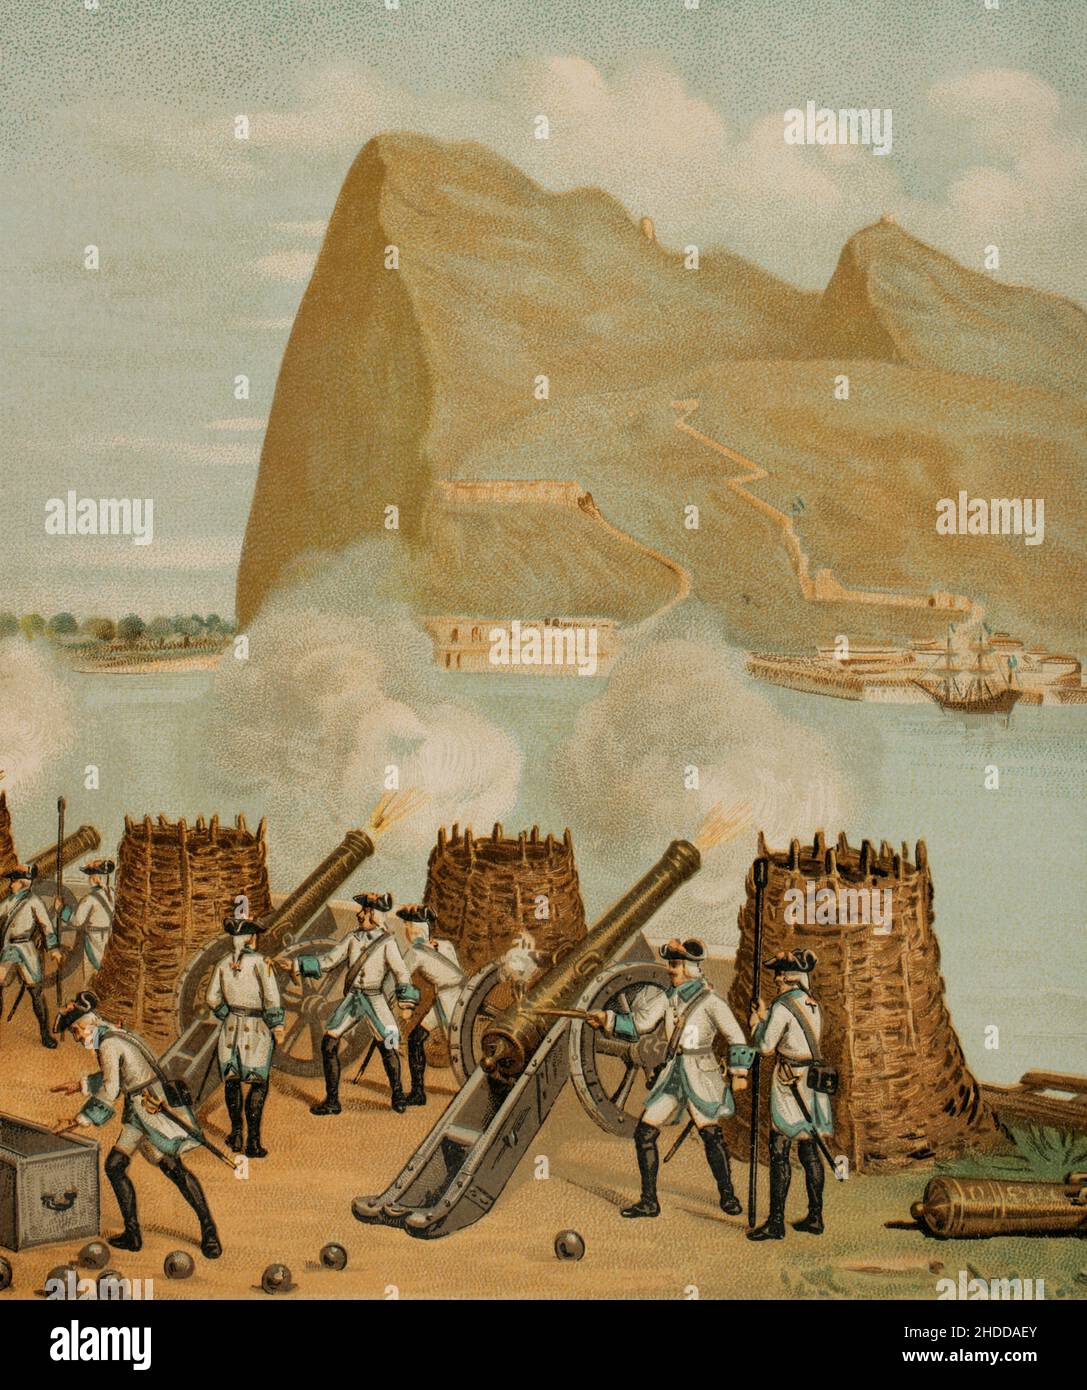 History of Spain. 18th century. Illustration depicting one of the sieges of Gibraltar. Spanish troops trying to recover the territory taken by the Anglo-Dutch coalition in 1704. Unsuccessful siege of Gibraltar. Chromolithography, detail. 'Historia General de España' (General History of Spain), by Miguel Morayta. Volume V. Madrid, 1891. Stock Photo